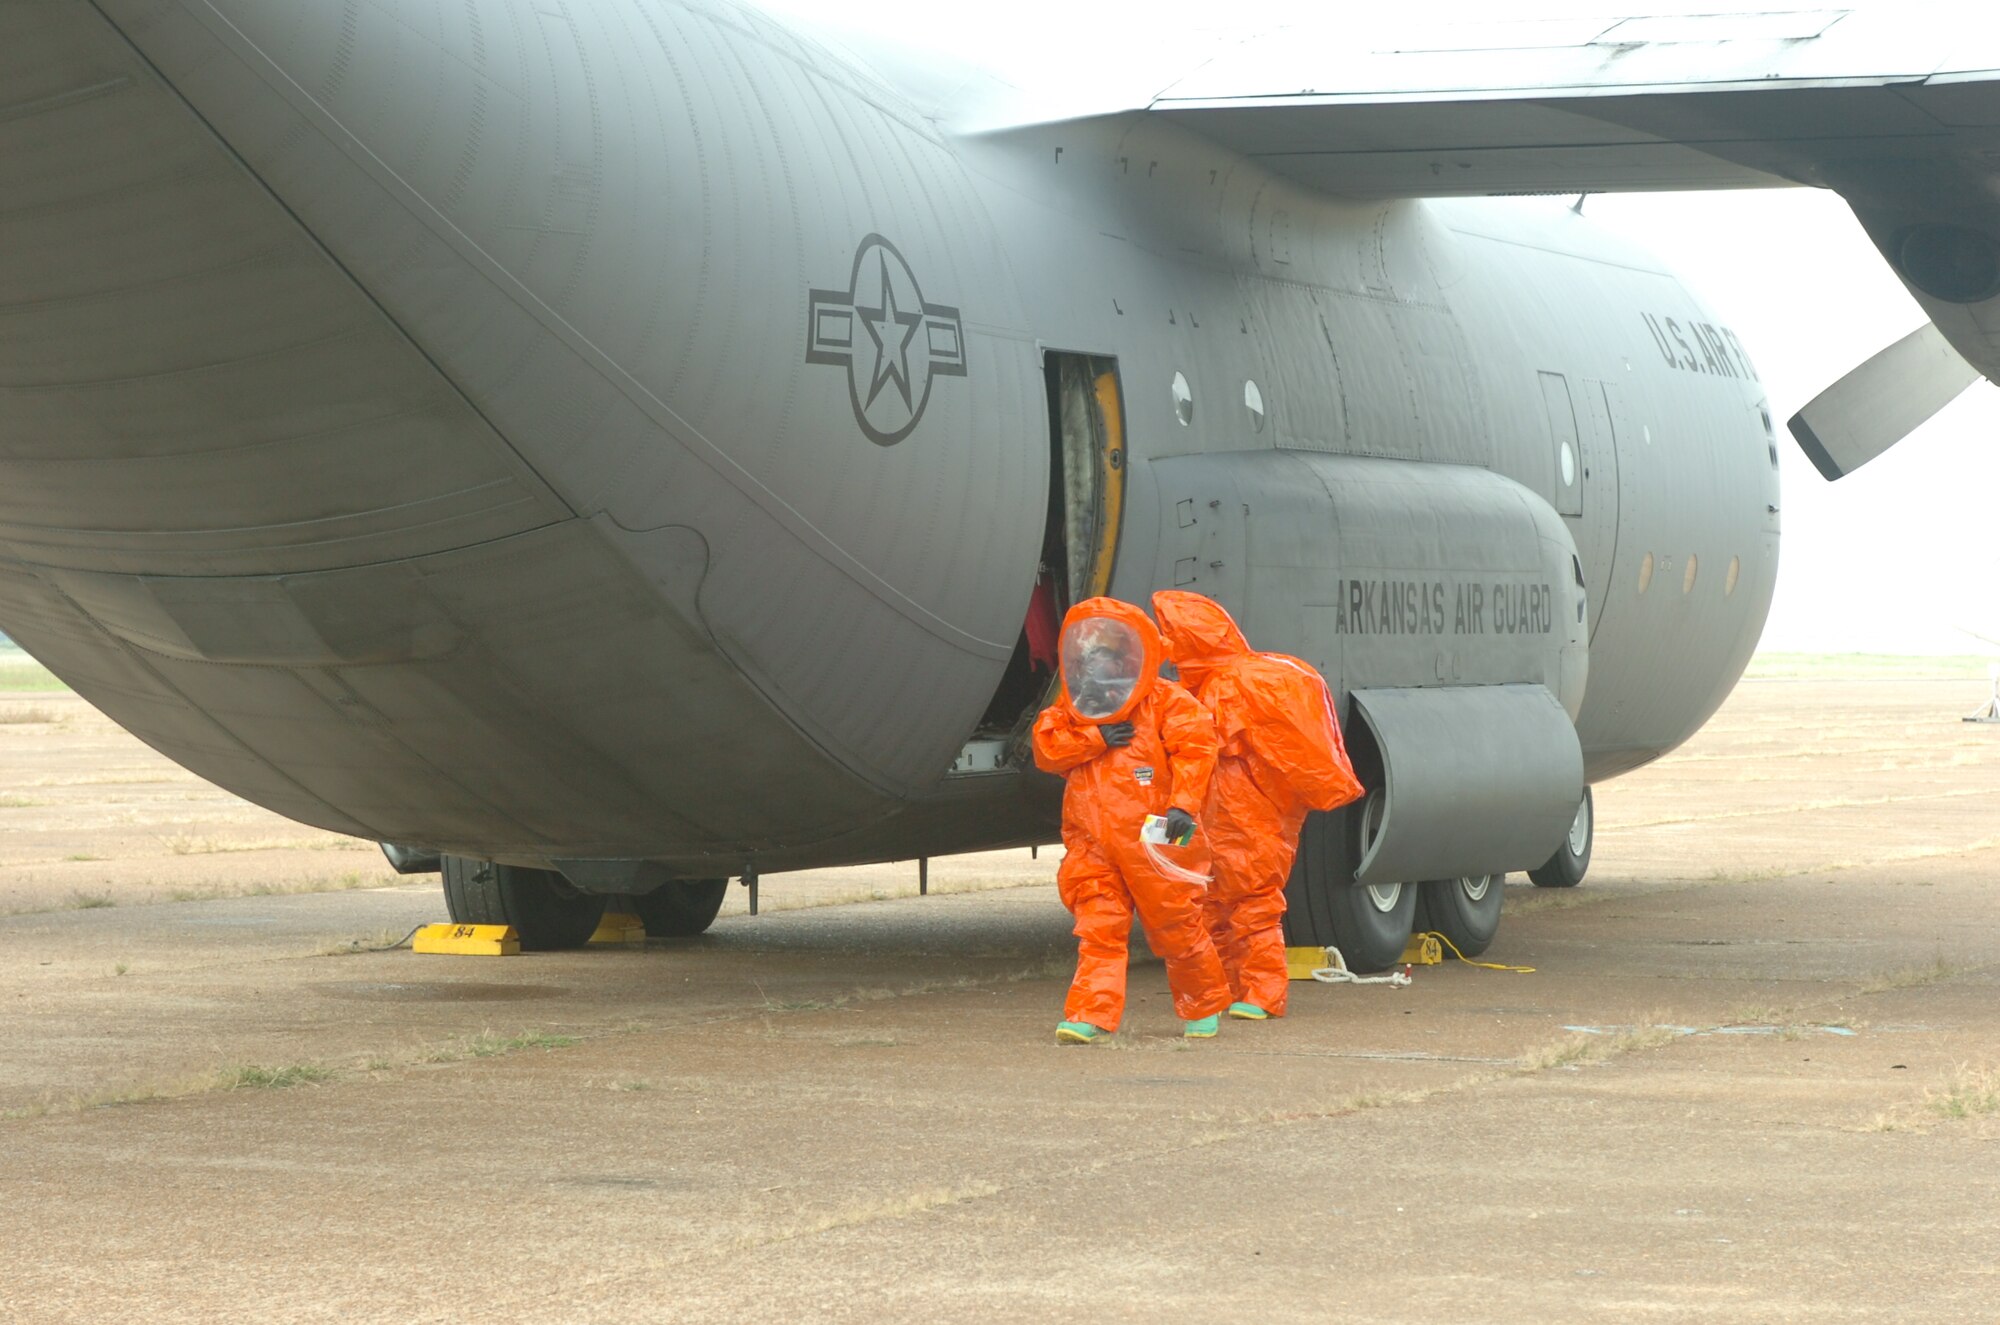 Members of the Walnut Ridge Fire Department's HAZMAT Response Team investigate a chemical spill and compartment fire aboard a C-130 aircraft during an exercise at the Walnut Ridge Airport on Tuesday, September 1, 2009.  The aircraft and crew were from the 189th Airlift Wing of the Arkansas Air National Guard based at Little Rock Air Force Base.  (Photo by Maj. Keith Moore, public affairs officer for the Arkansas Air National Guard.)